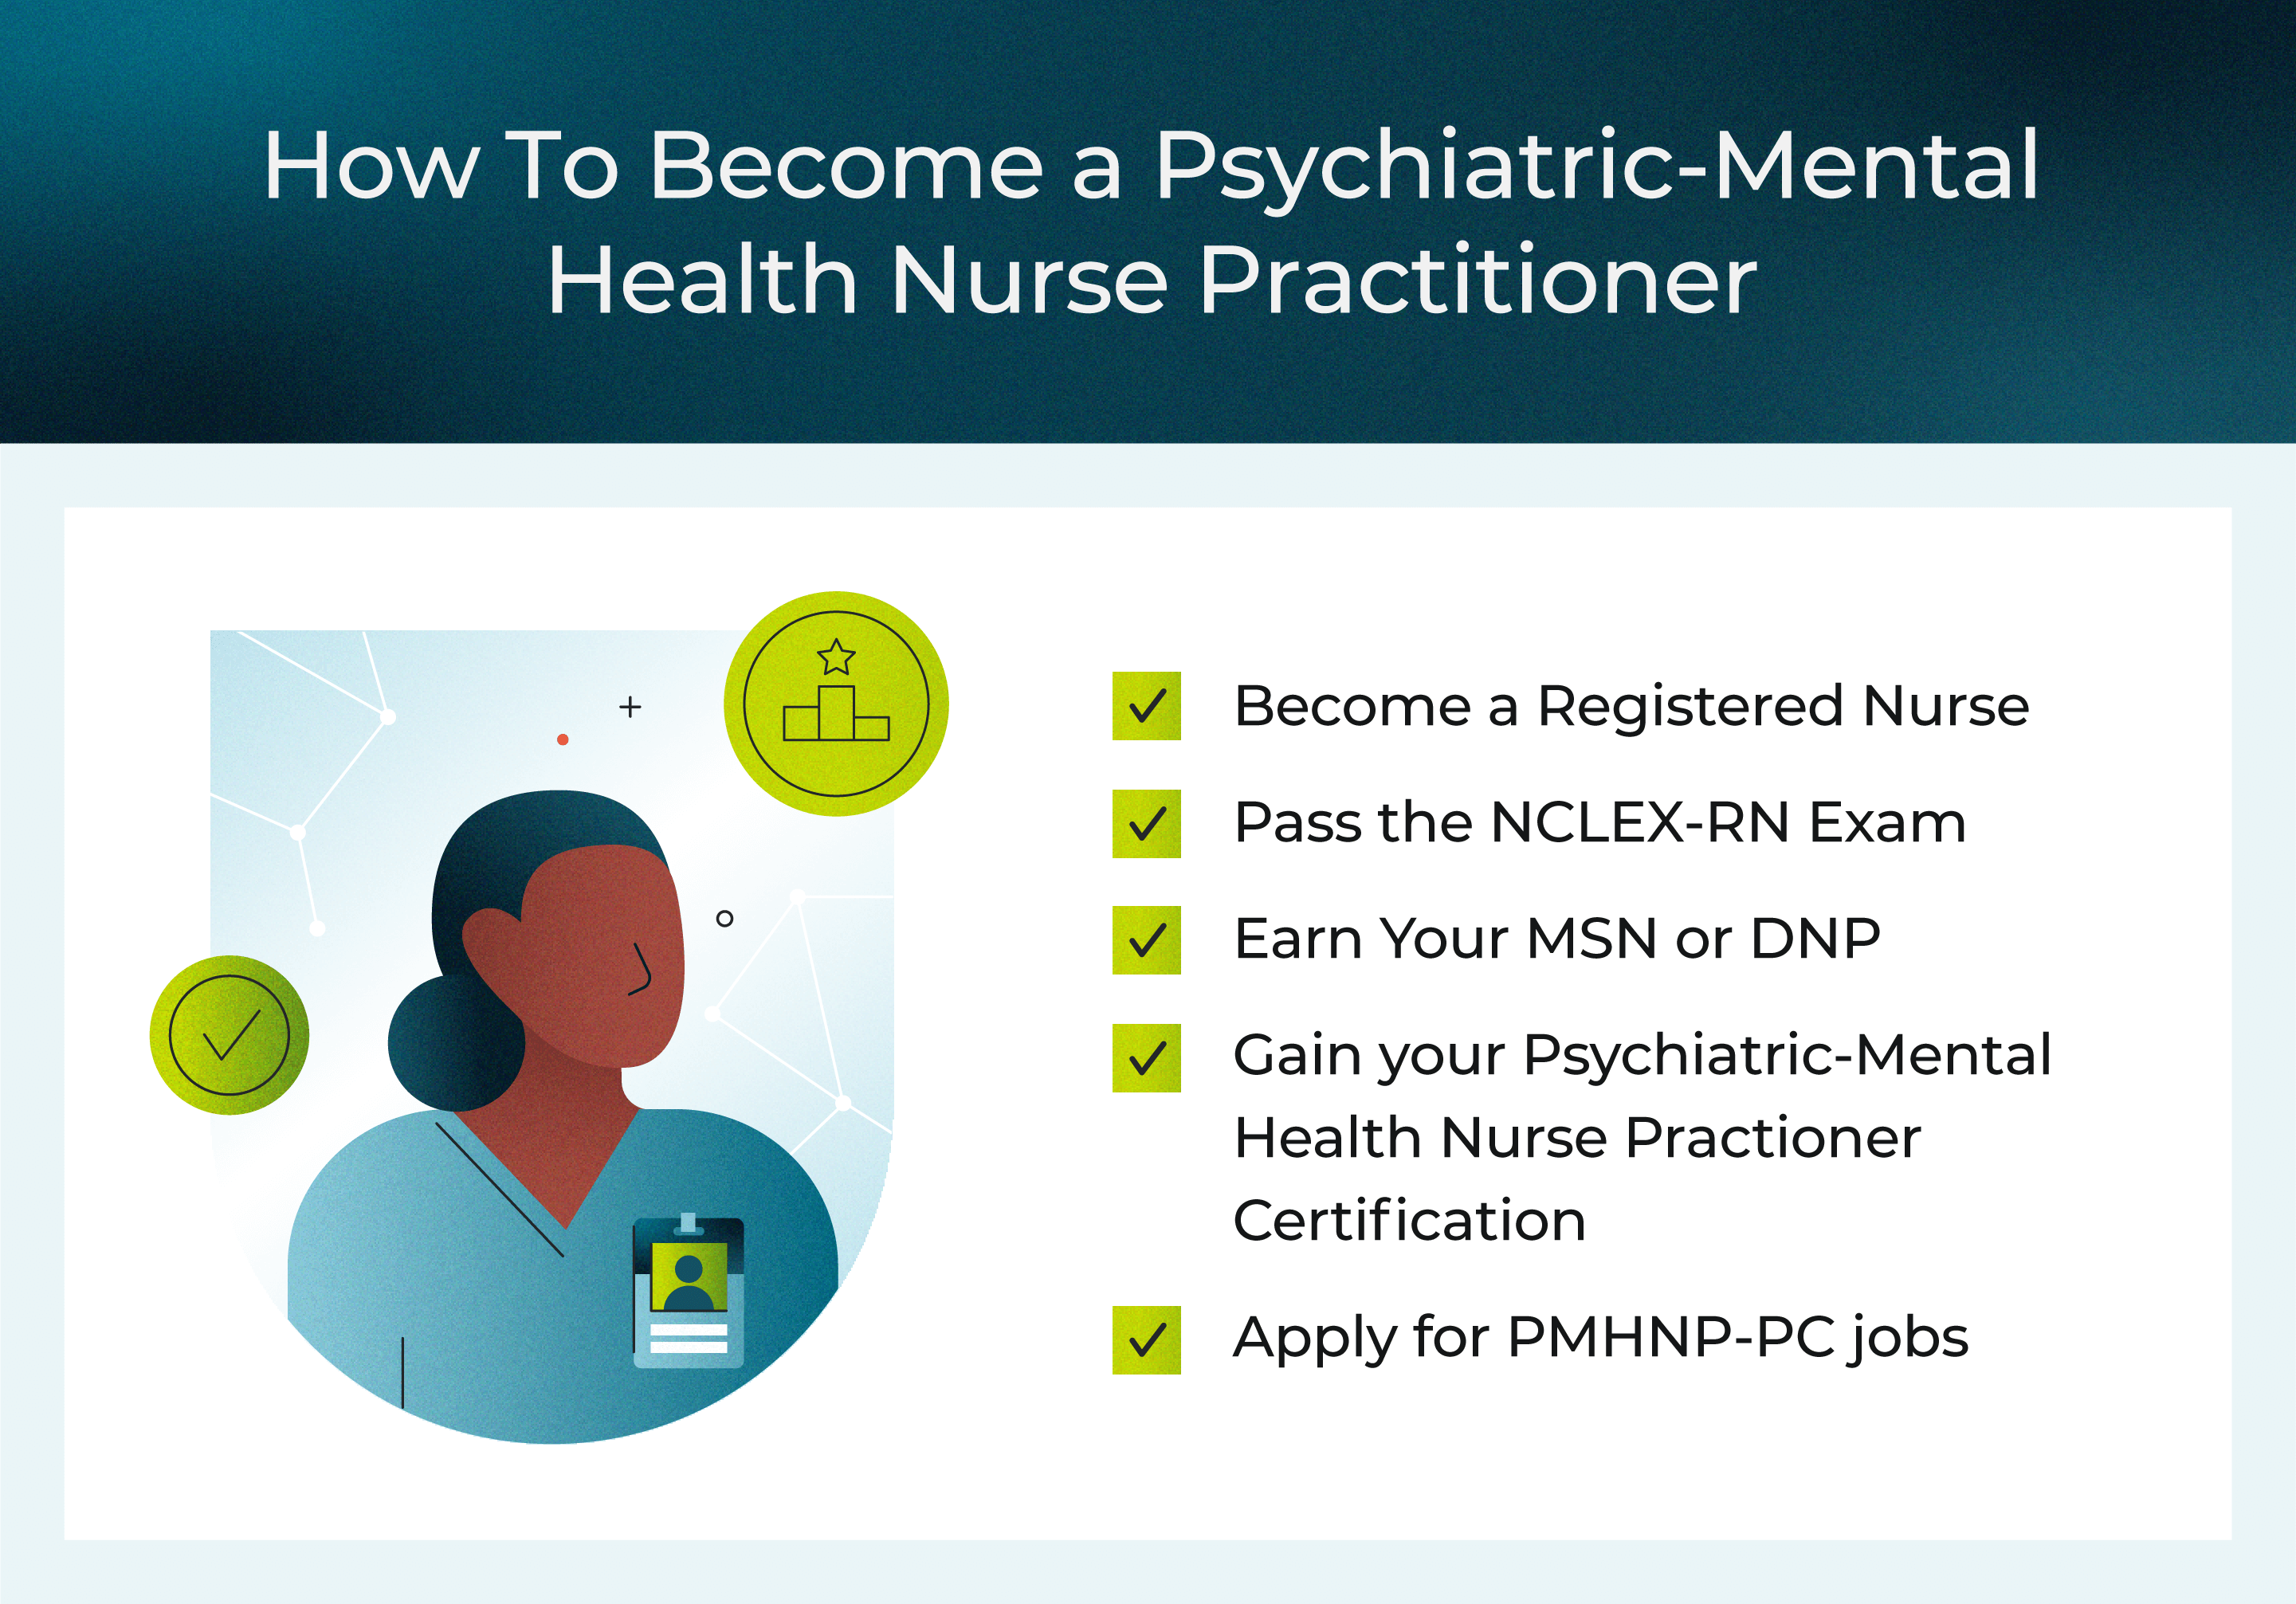 A “How to become a psychiatric- mental health nurse practitioner” visual outlines six steps to become a PMHNP.